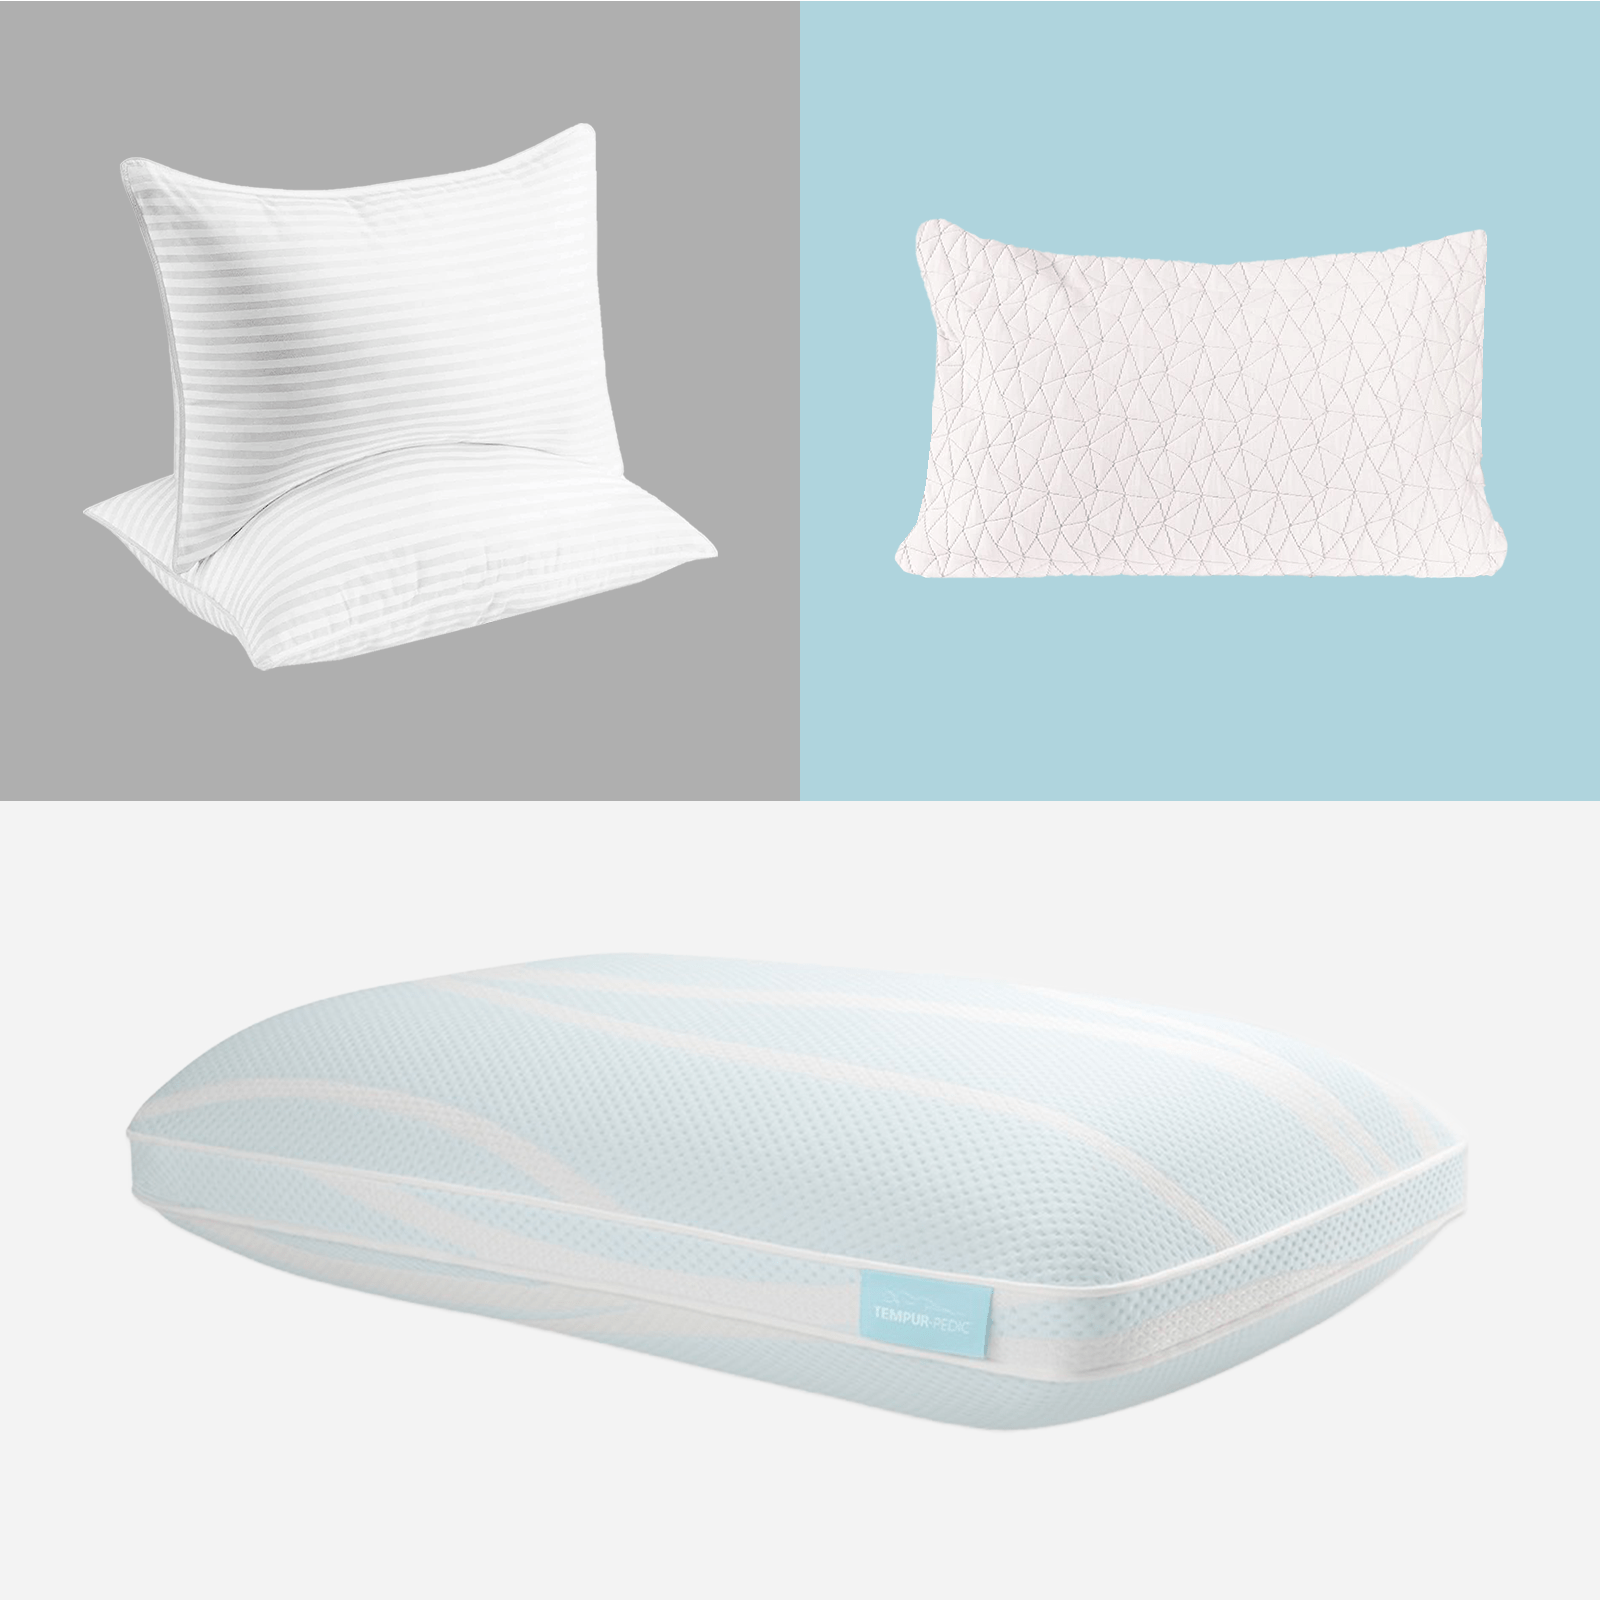 10 Best Cooling Pillows of 2023, Tested by Experts